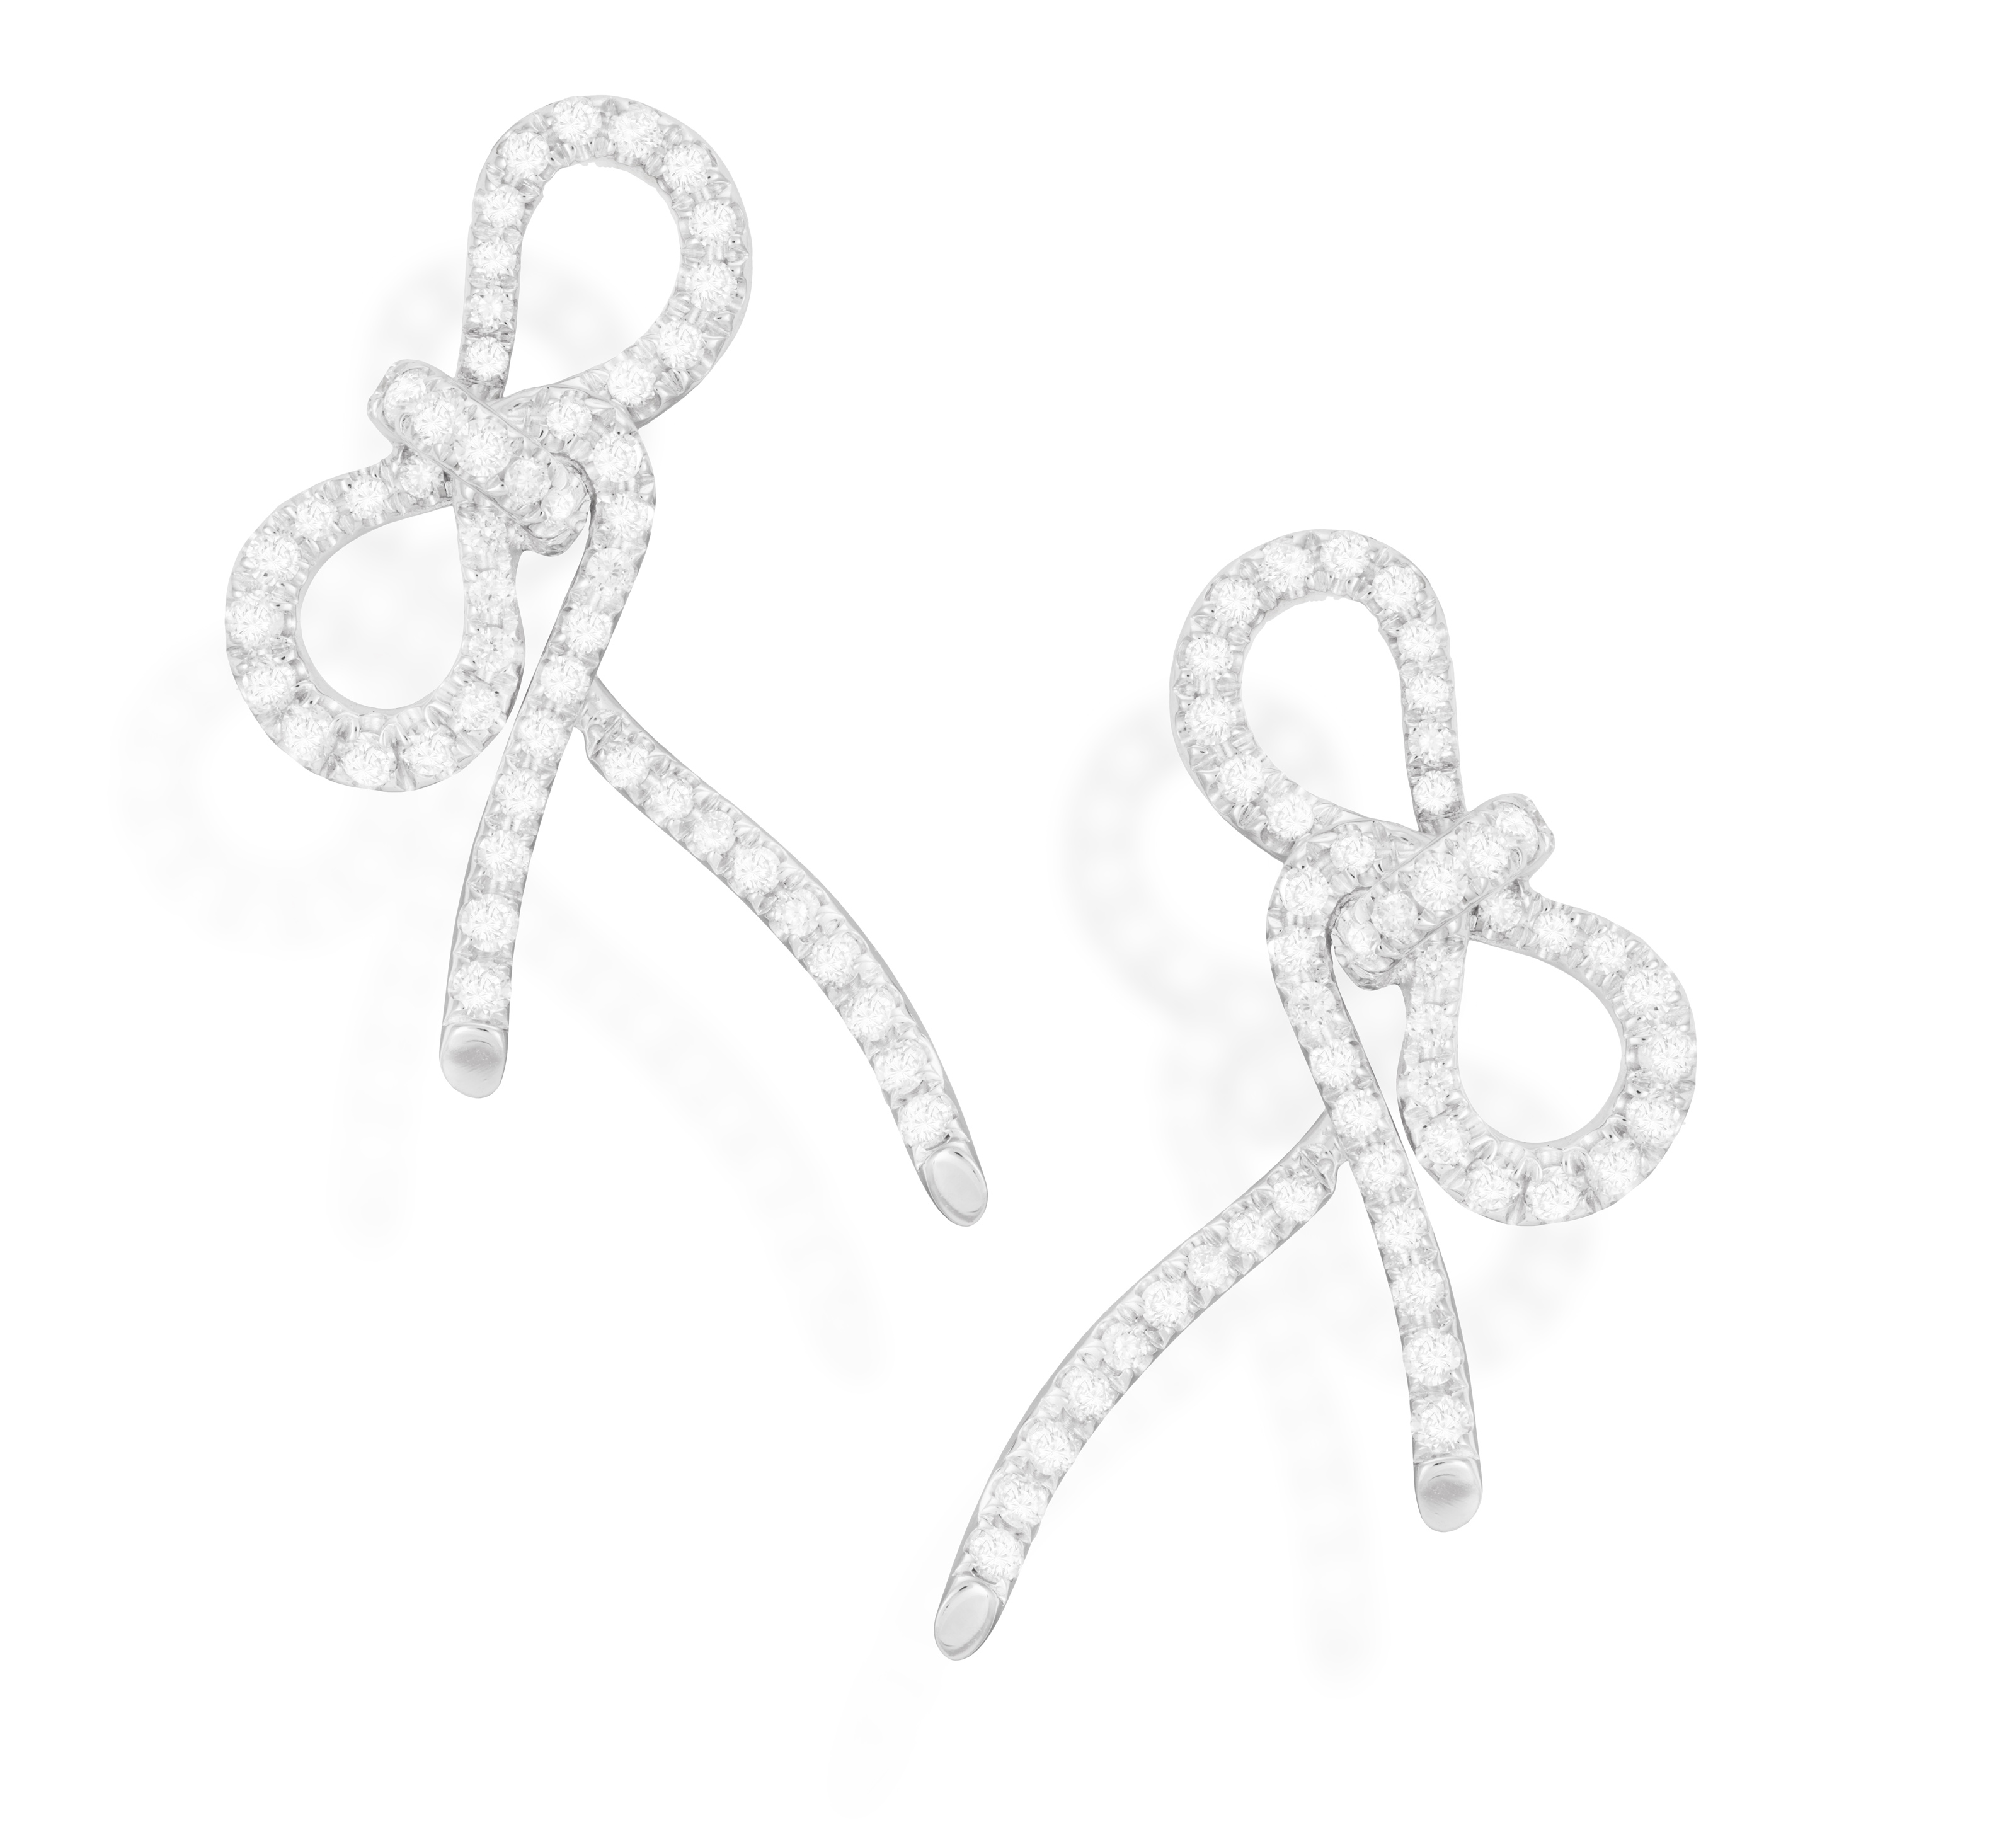 A PAIR OF DIAMOND EARRINGS, BY MARGHERITA BURGENER Each designed as a stylised bow, pavé-set with